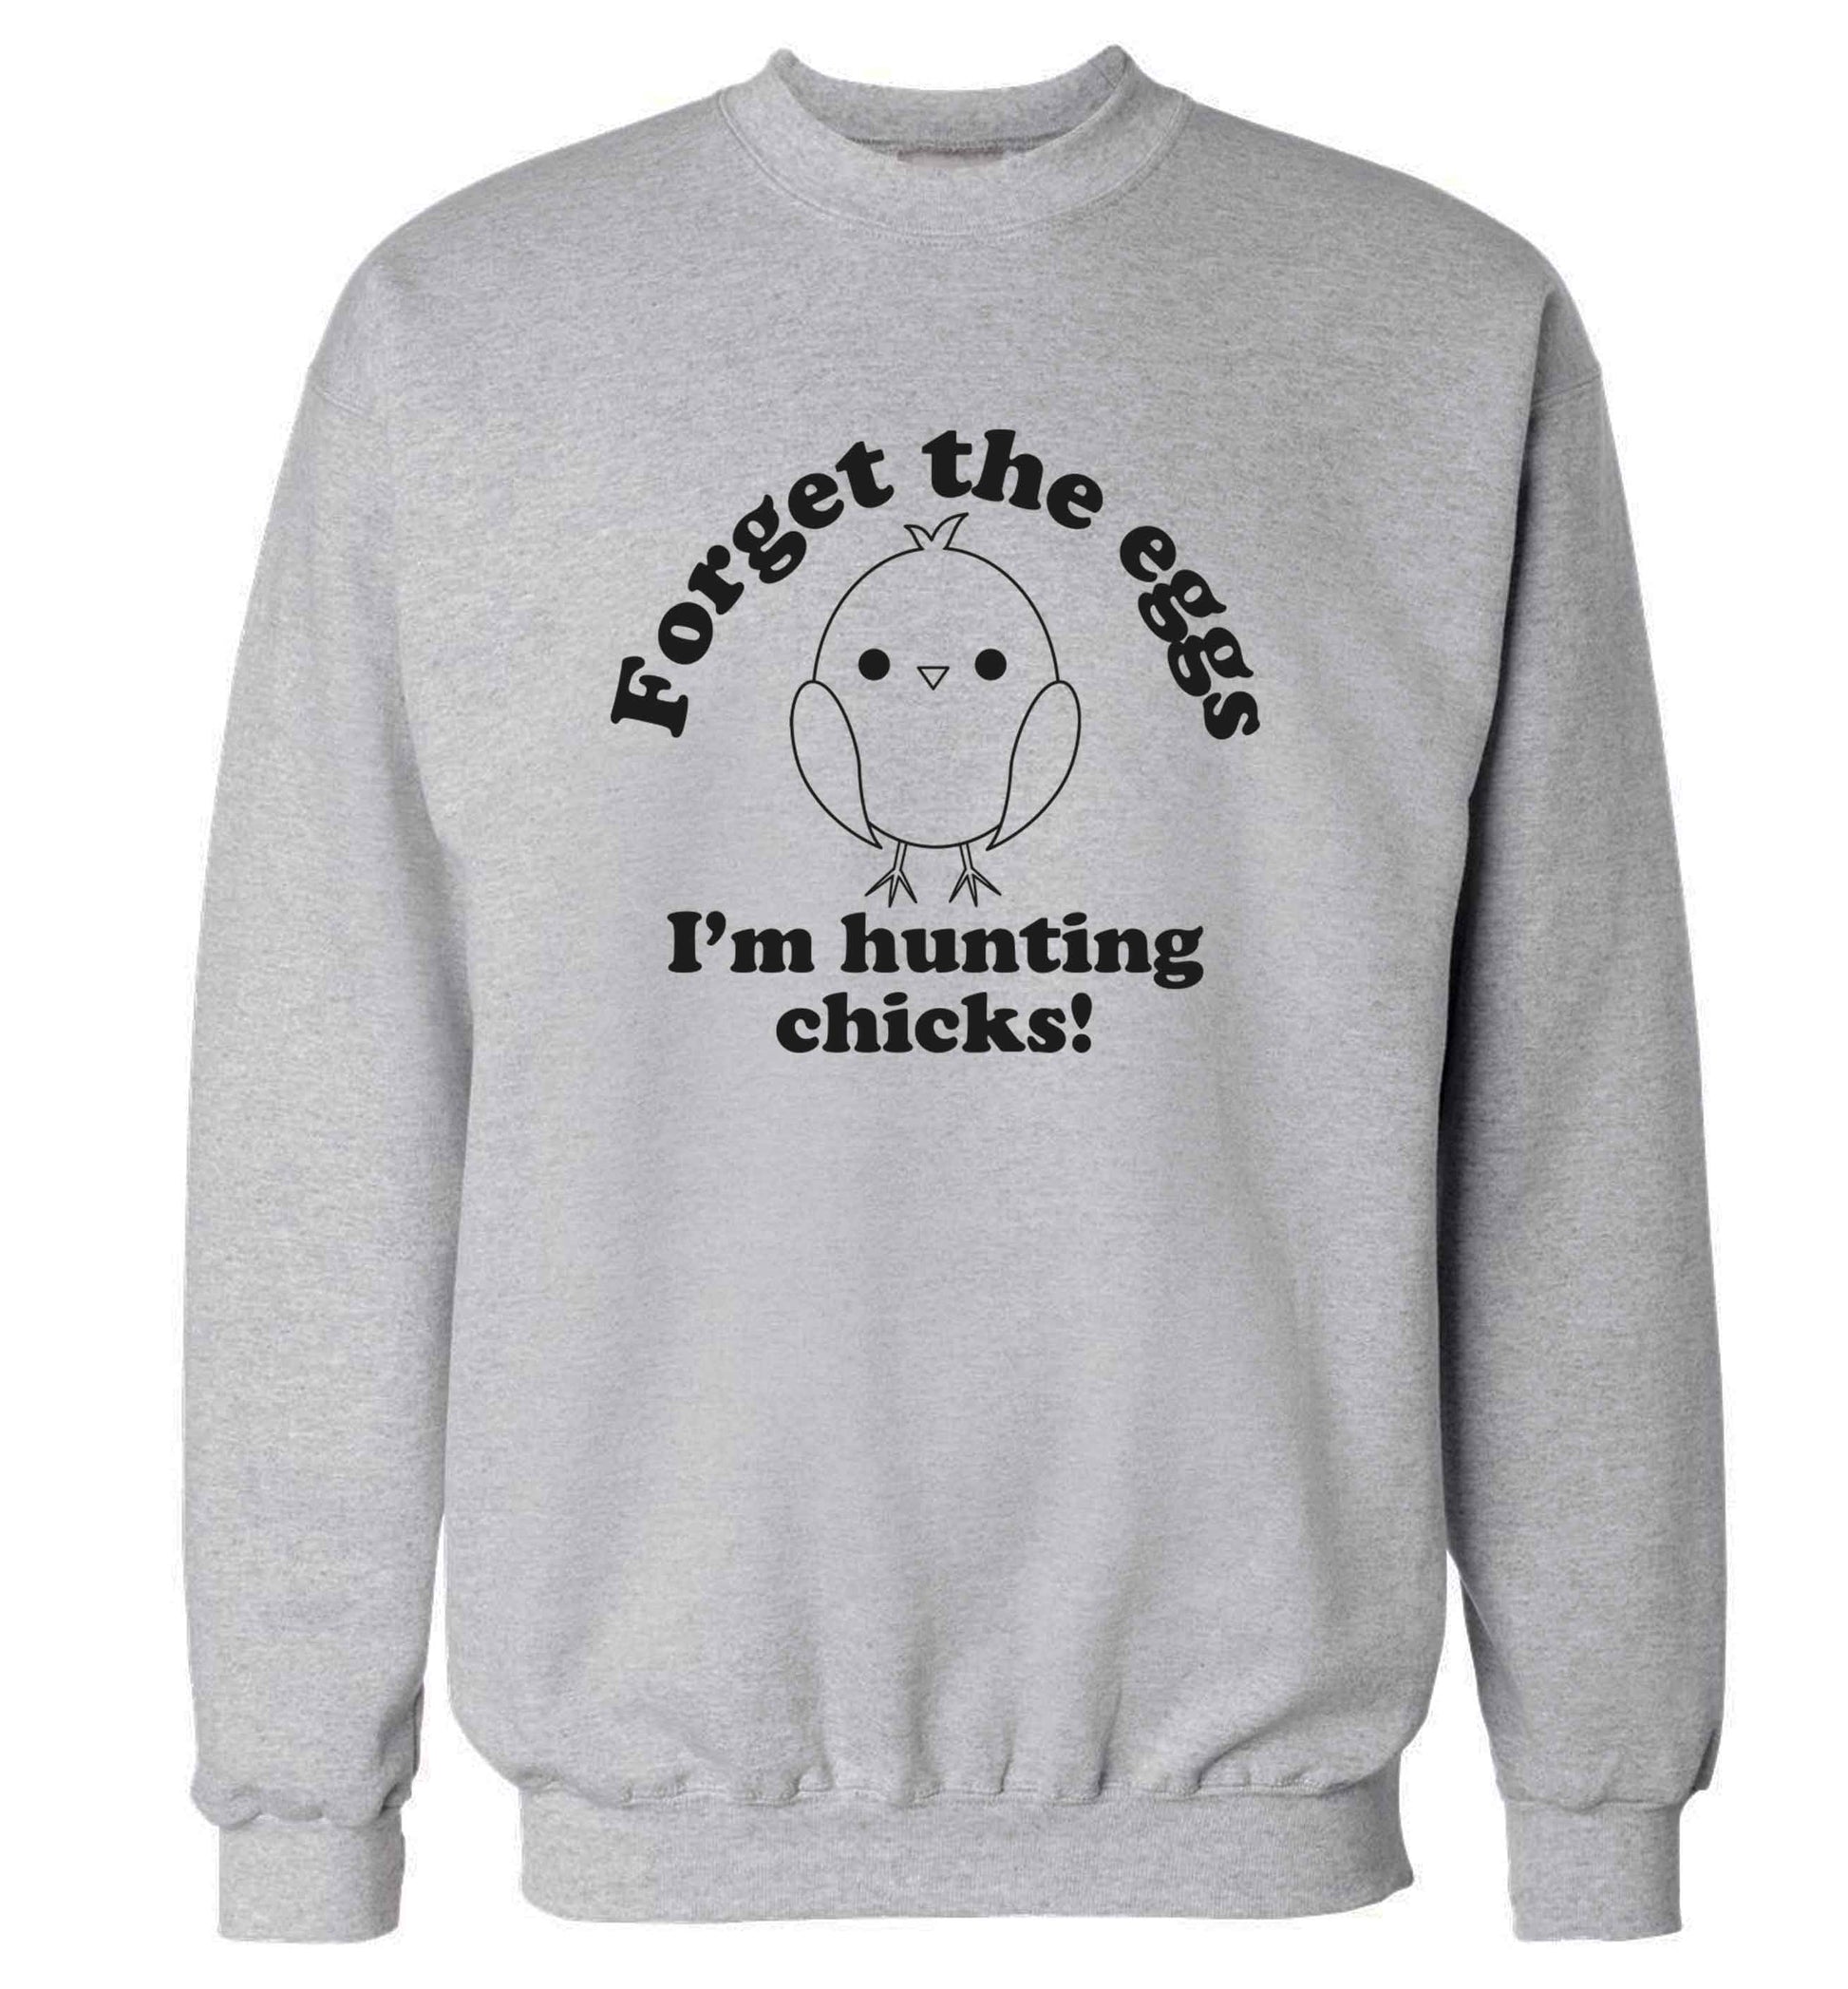 Forget the eggs I'm hunting chicks! adult's unisex grey sweater 2XL